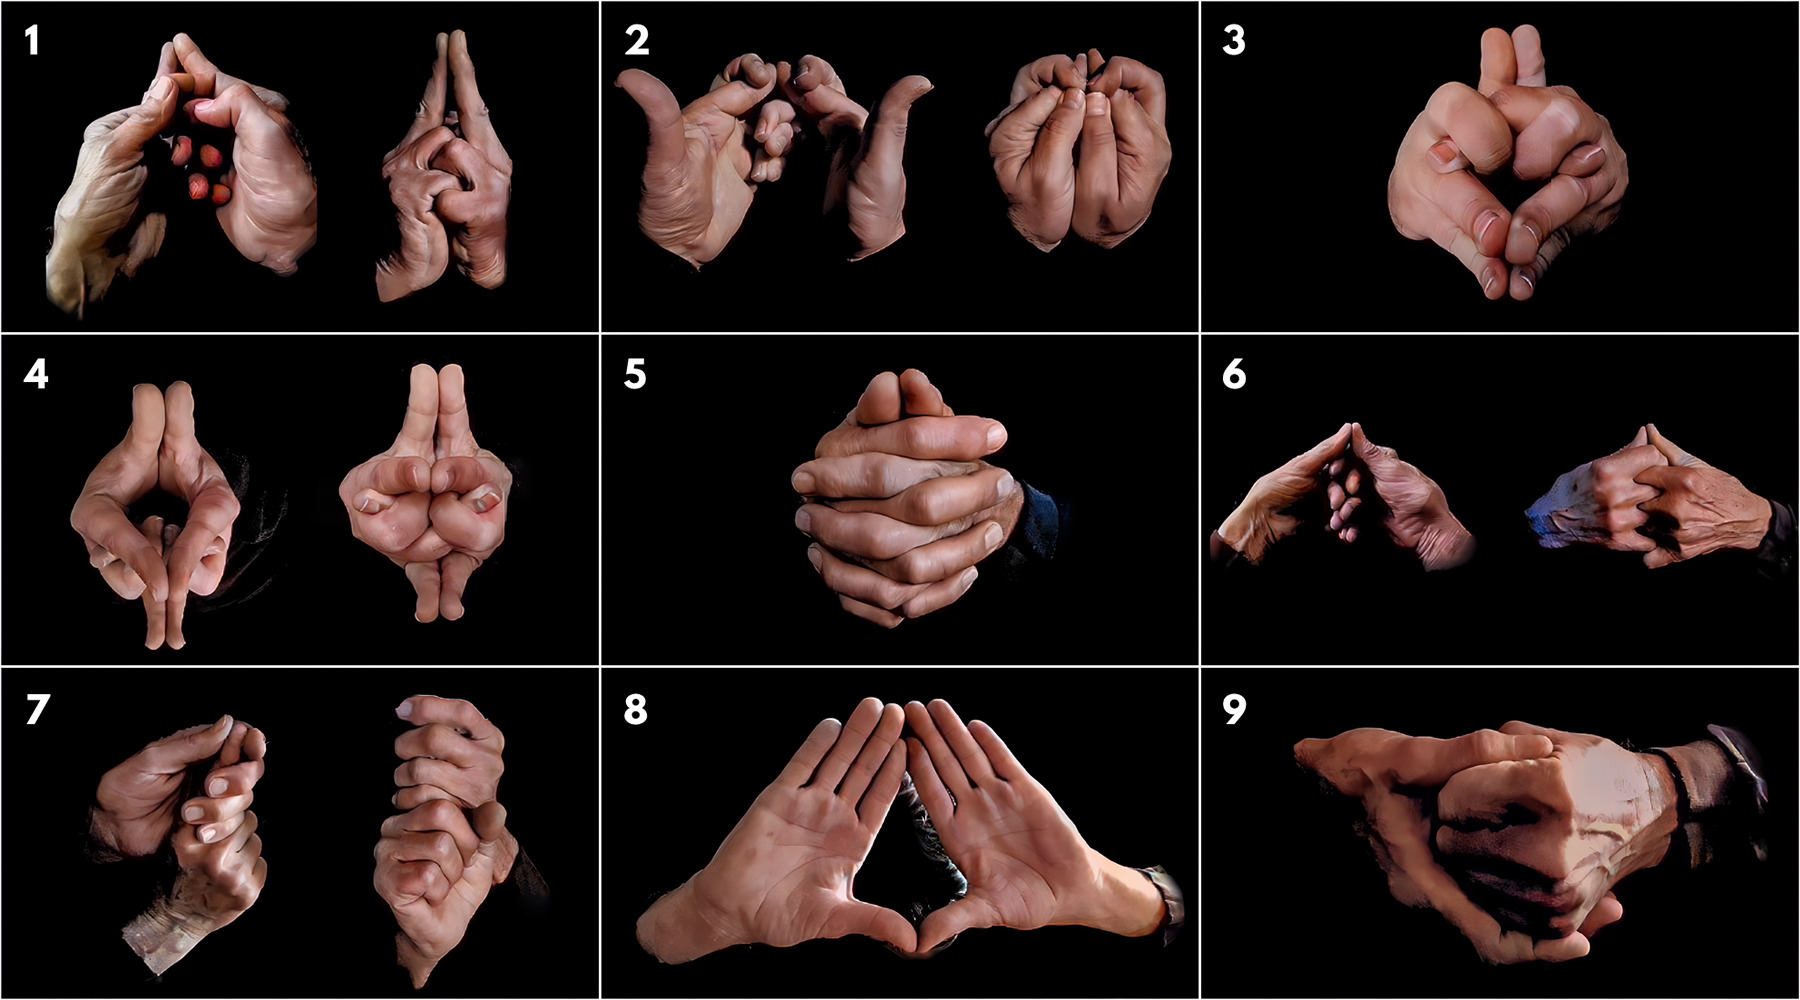 3 Powerful Hand Mudras For Weight Gain Easily - Fitsri Yoga